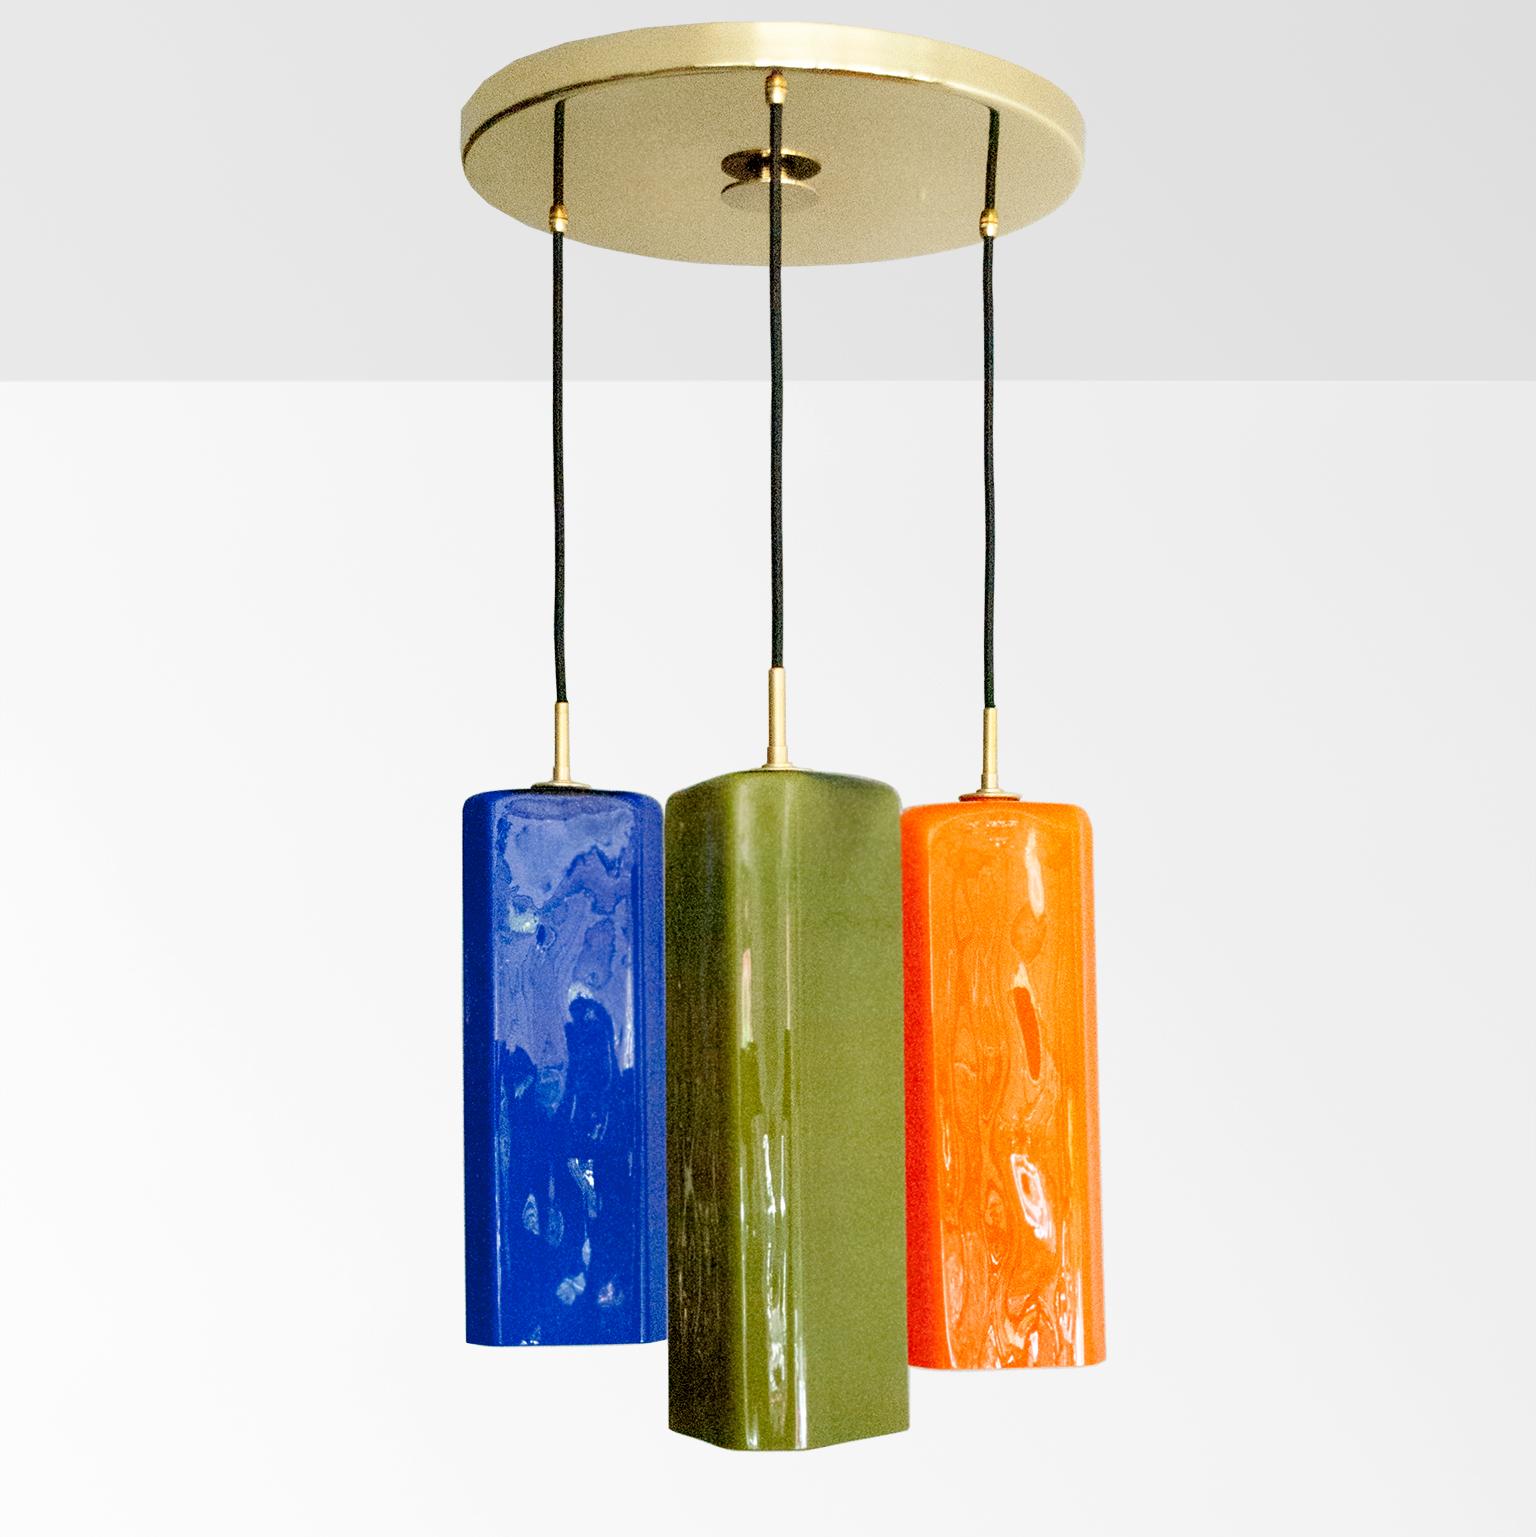 Large Italian, probably Vistosi, chandelier with three jewel colored glass shades. The cased glass shades have white interiors are triangular shaped with softly rounded corners. A large 15